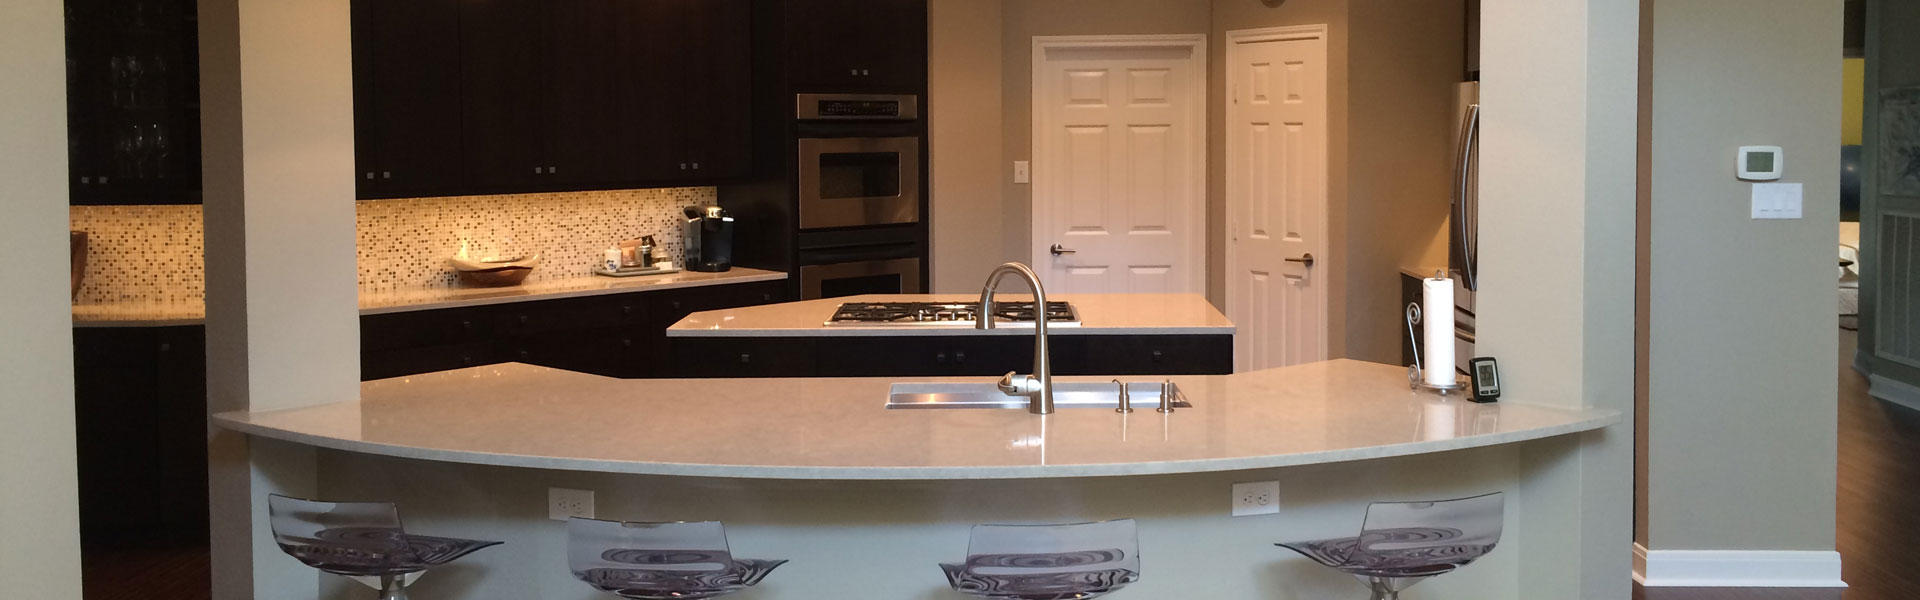 Custom Kitchen Remodels & Cabinet Design - Houston, TX from Bay Area